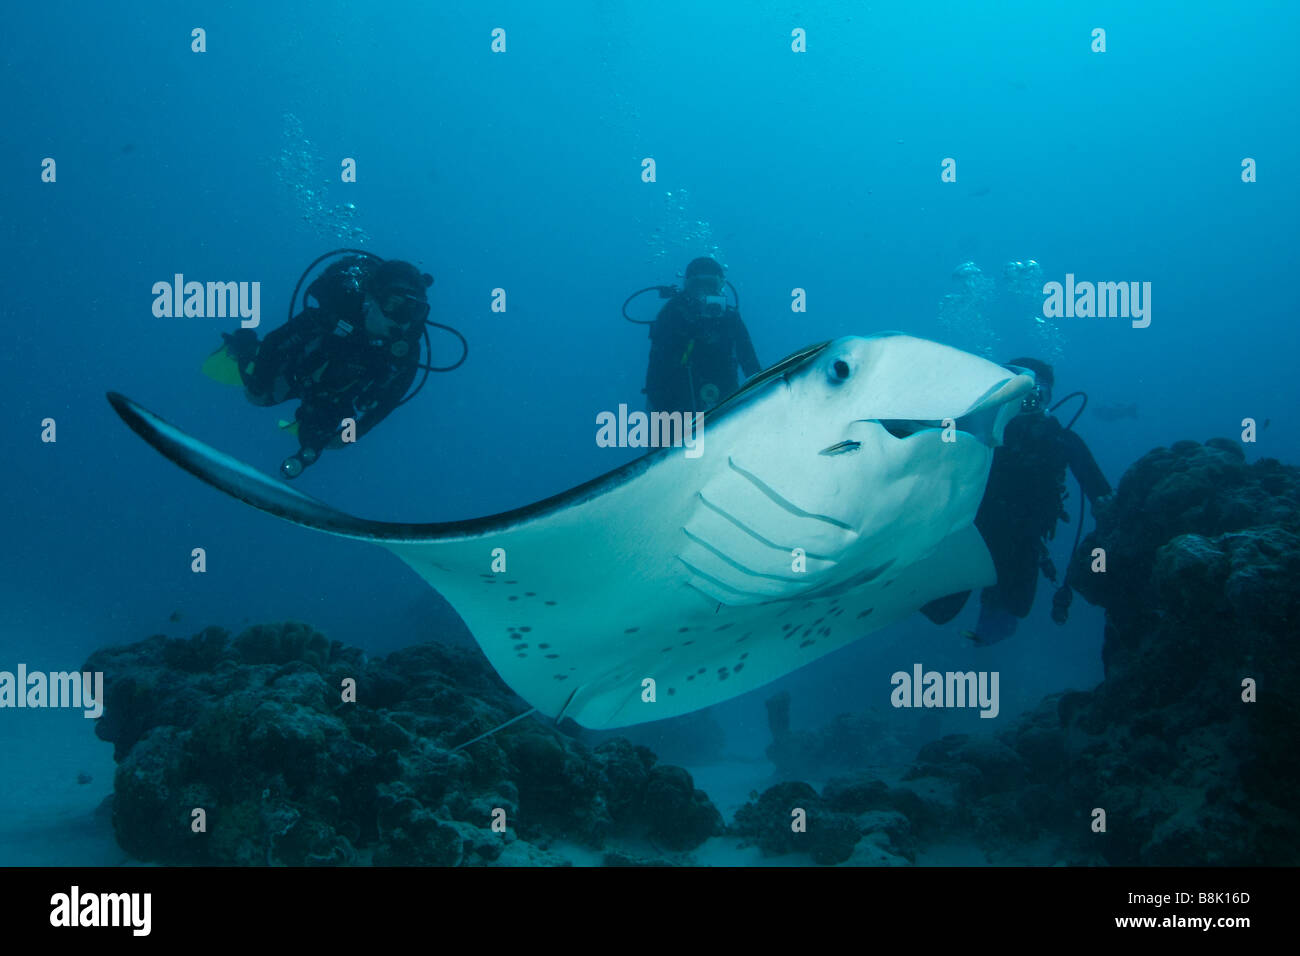 Giant manta ray and divers swimming together over coral reef heads on a sandy ocean bottom with blue water in background Stock Photo